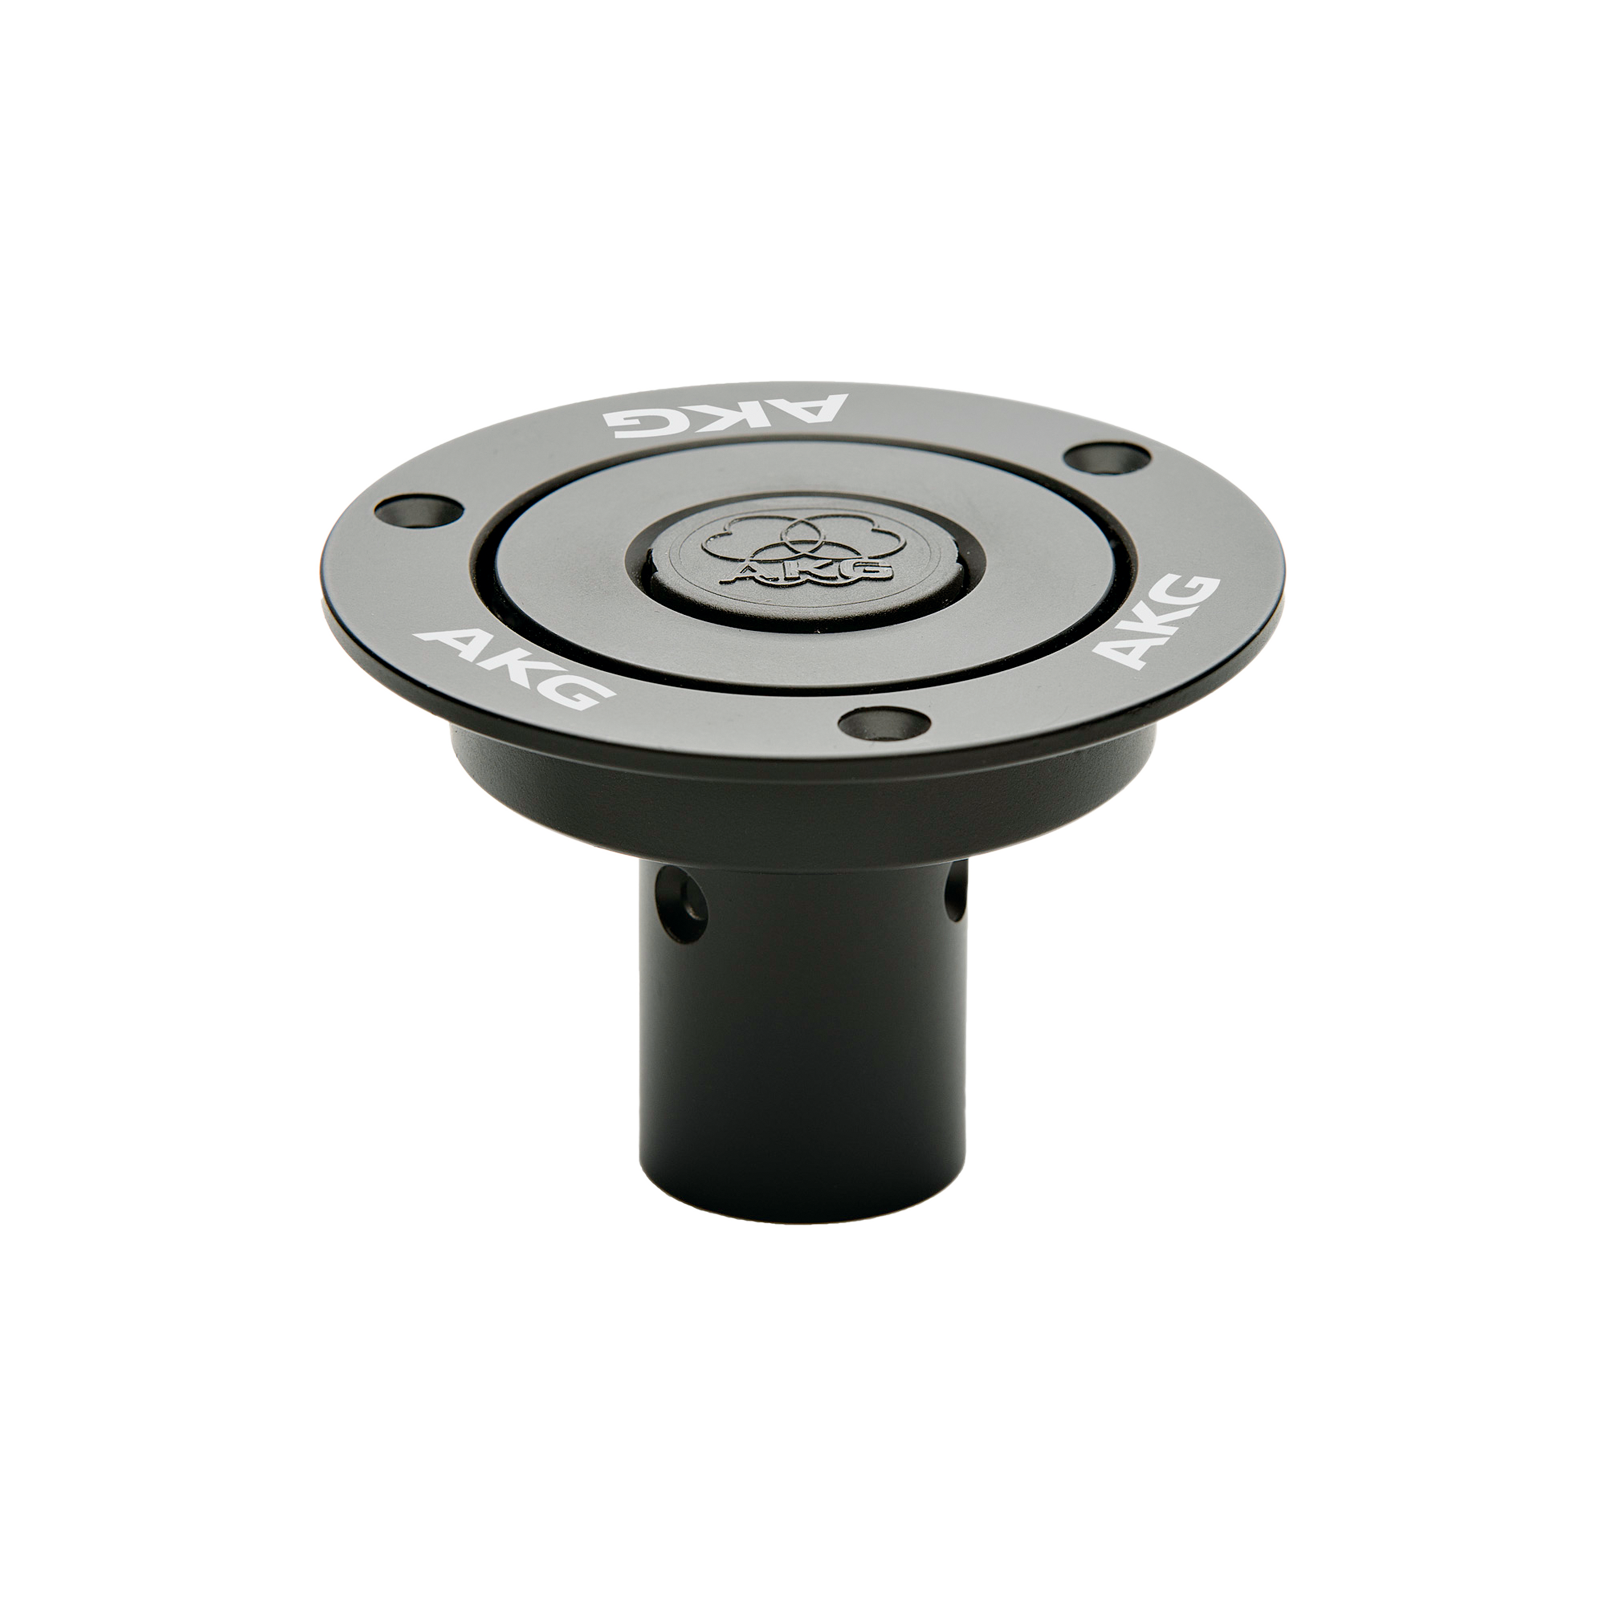 MF M - Black - Mounting flange for use with DAM+ Microphone series - Hero